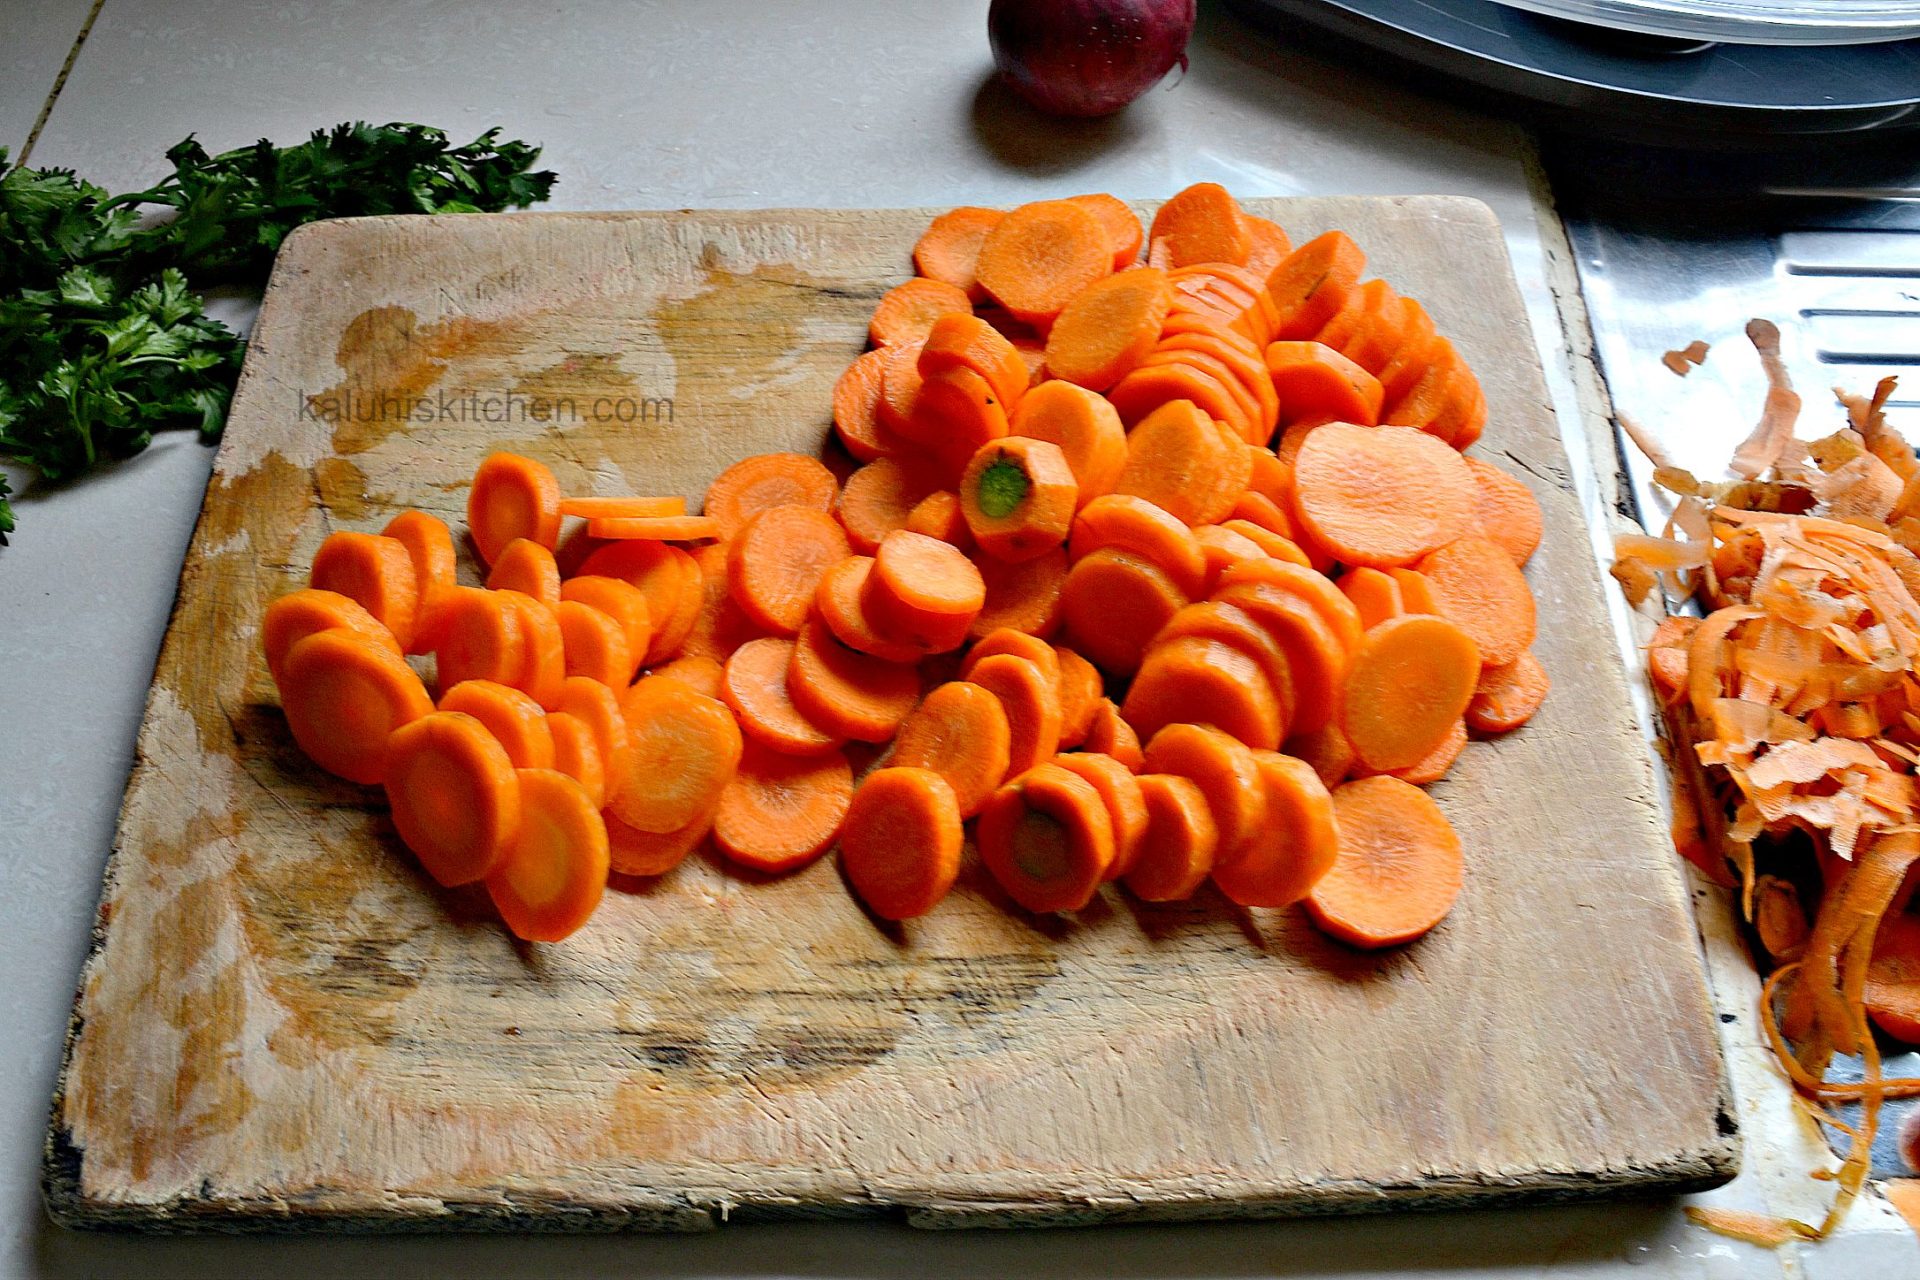 carrots sliced thinely allow them to get cooked alot faster_buttered carrots_kaluhiskitchen.com